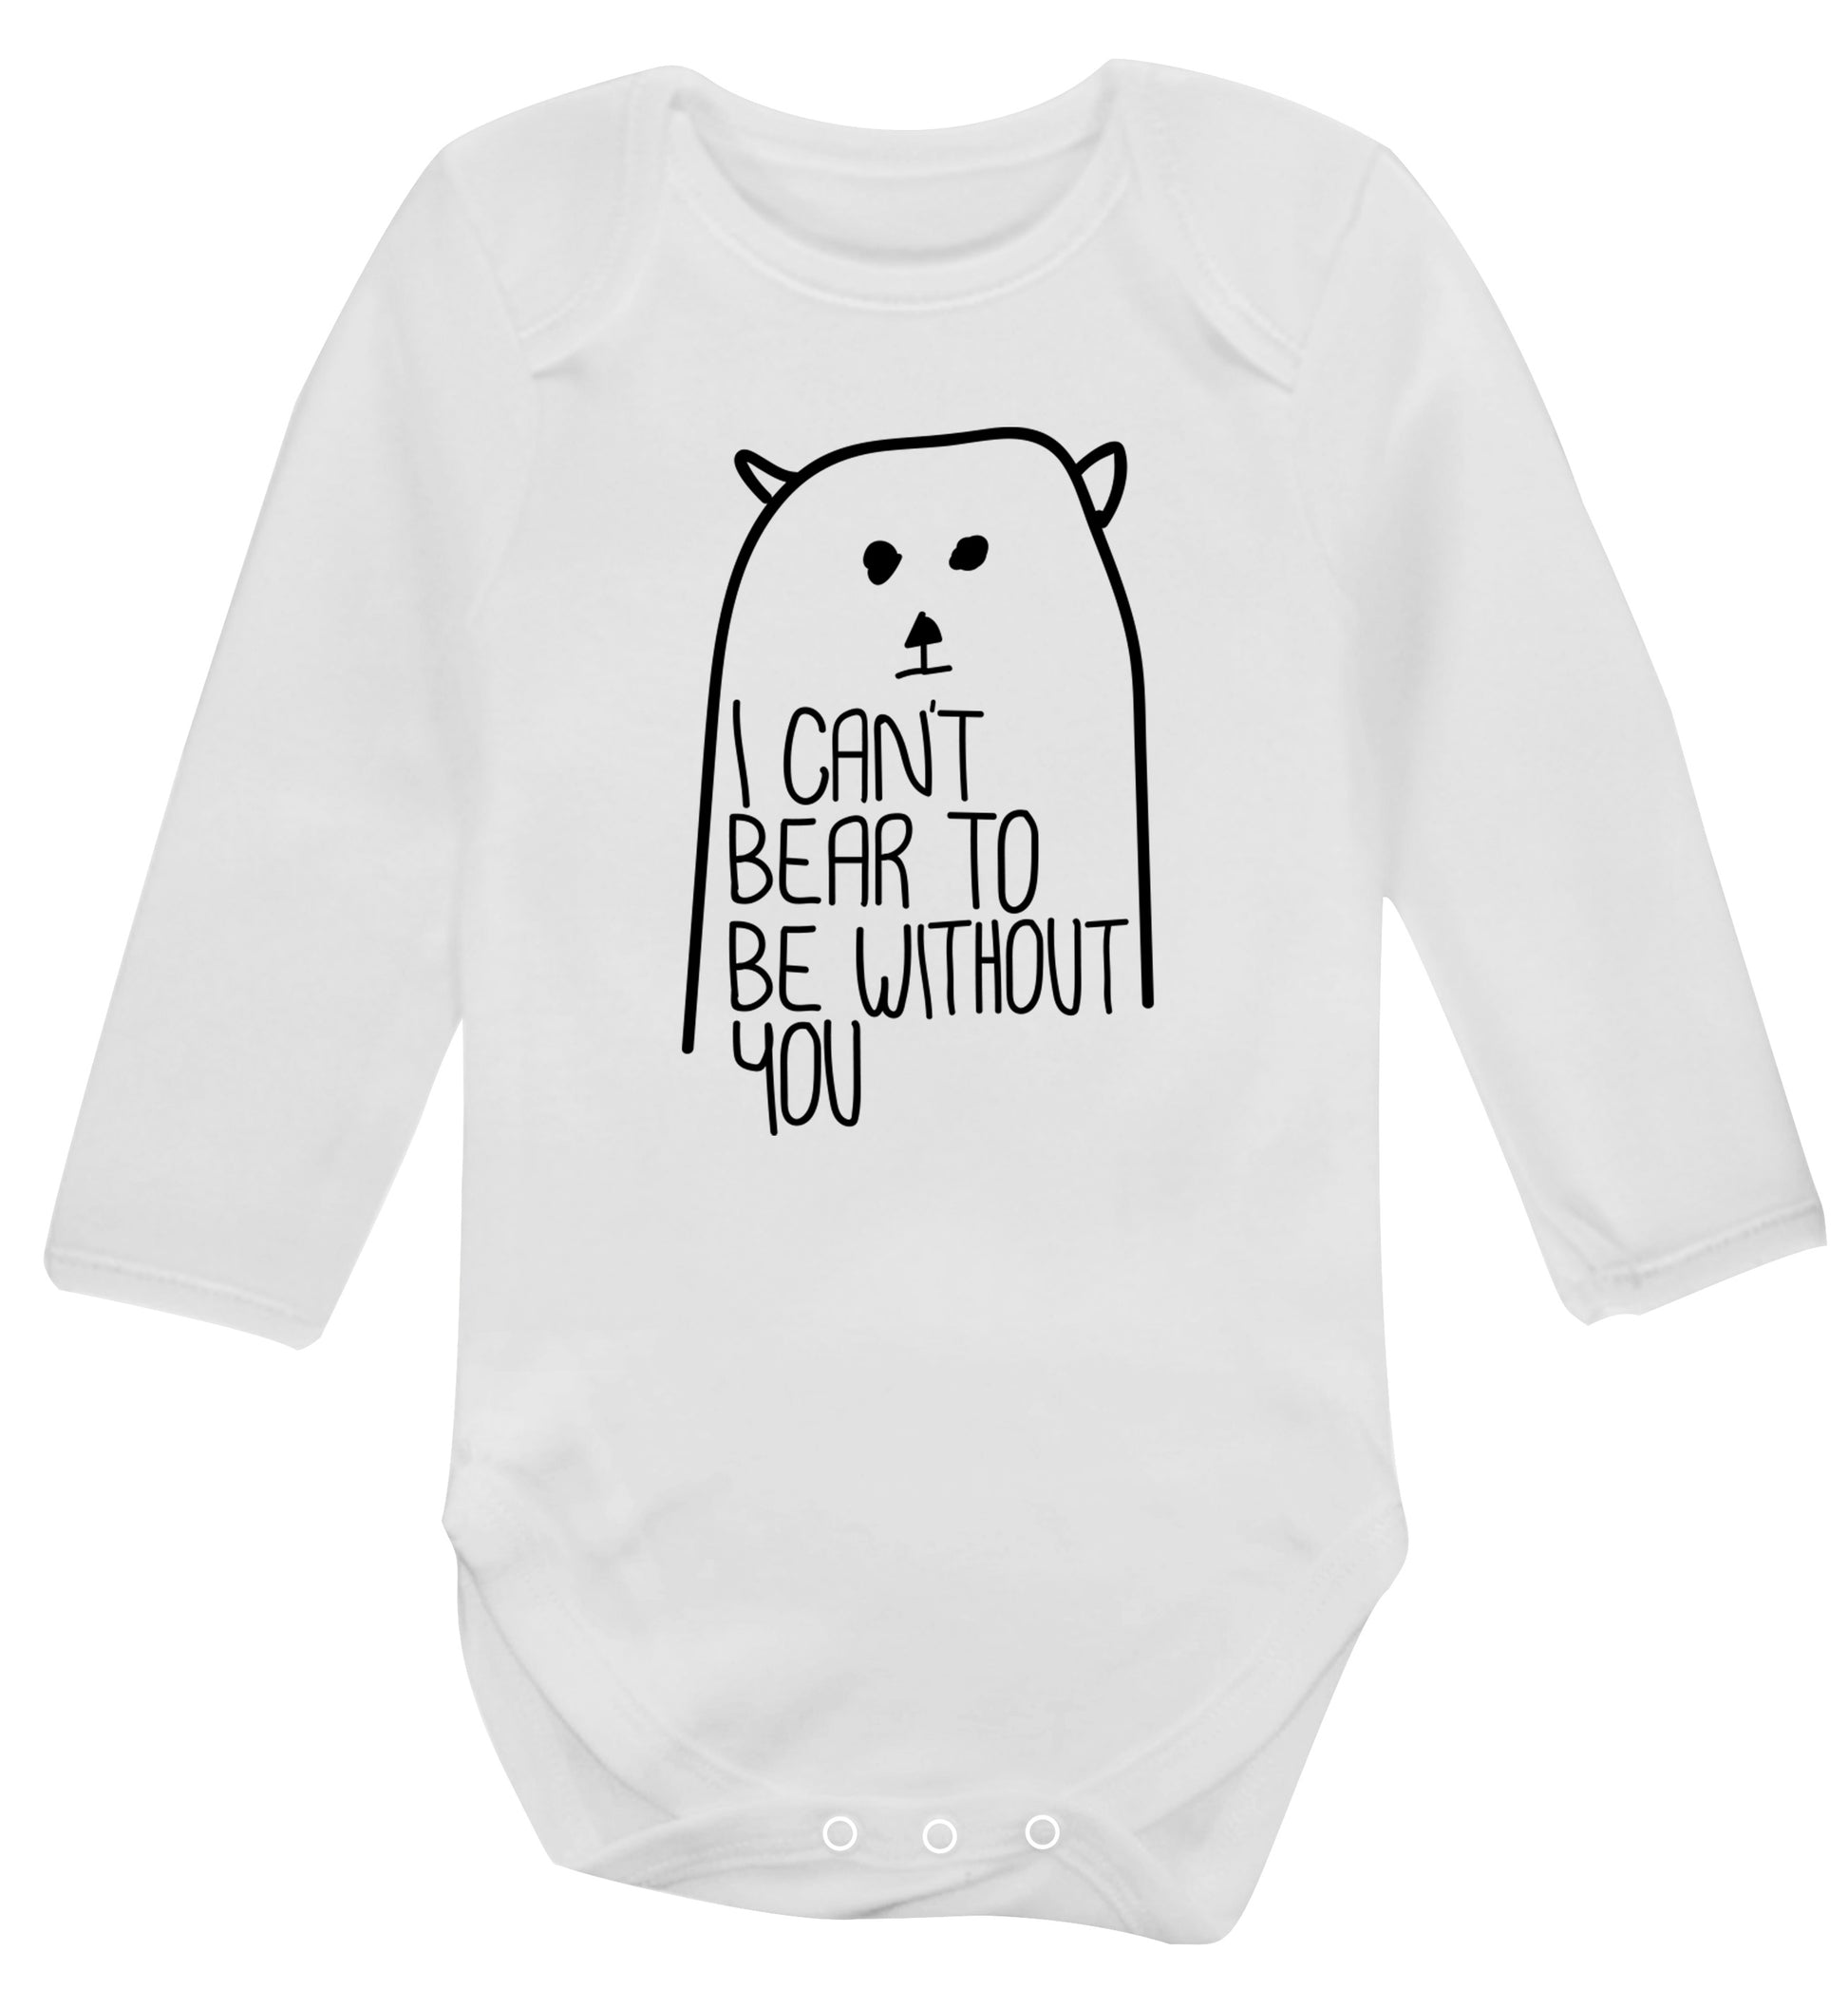 I can't bear to be without you Baby Vest long sleeved white 6-12 months